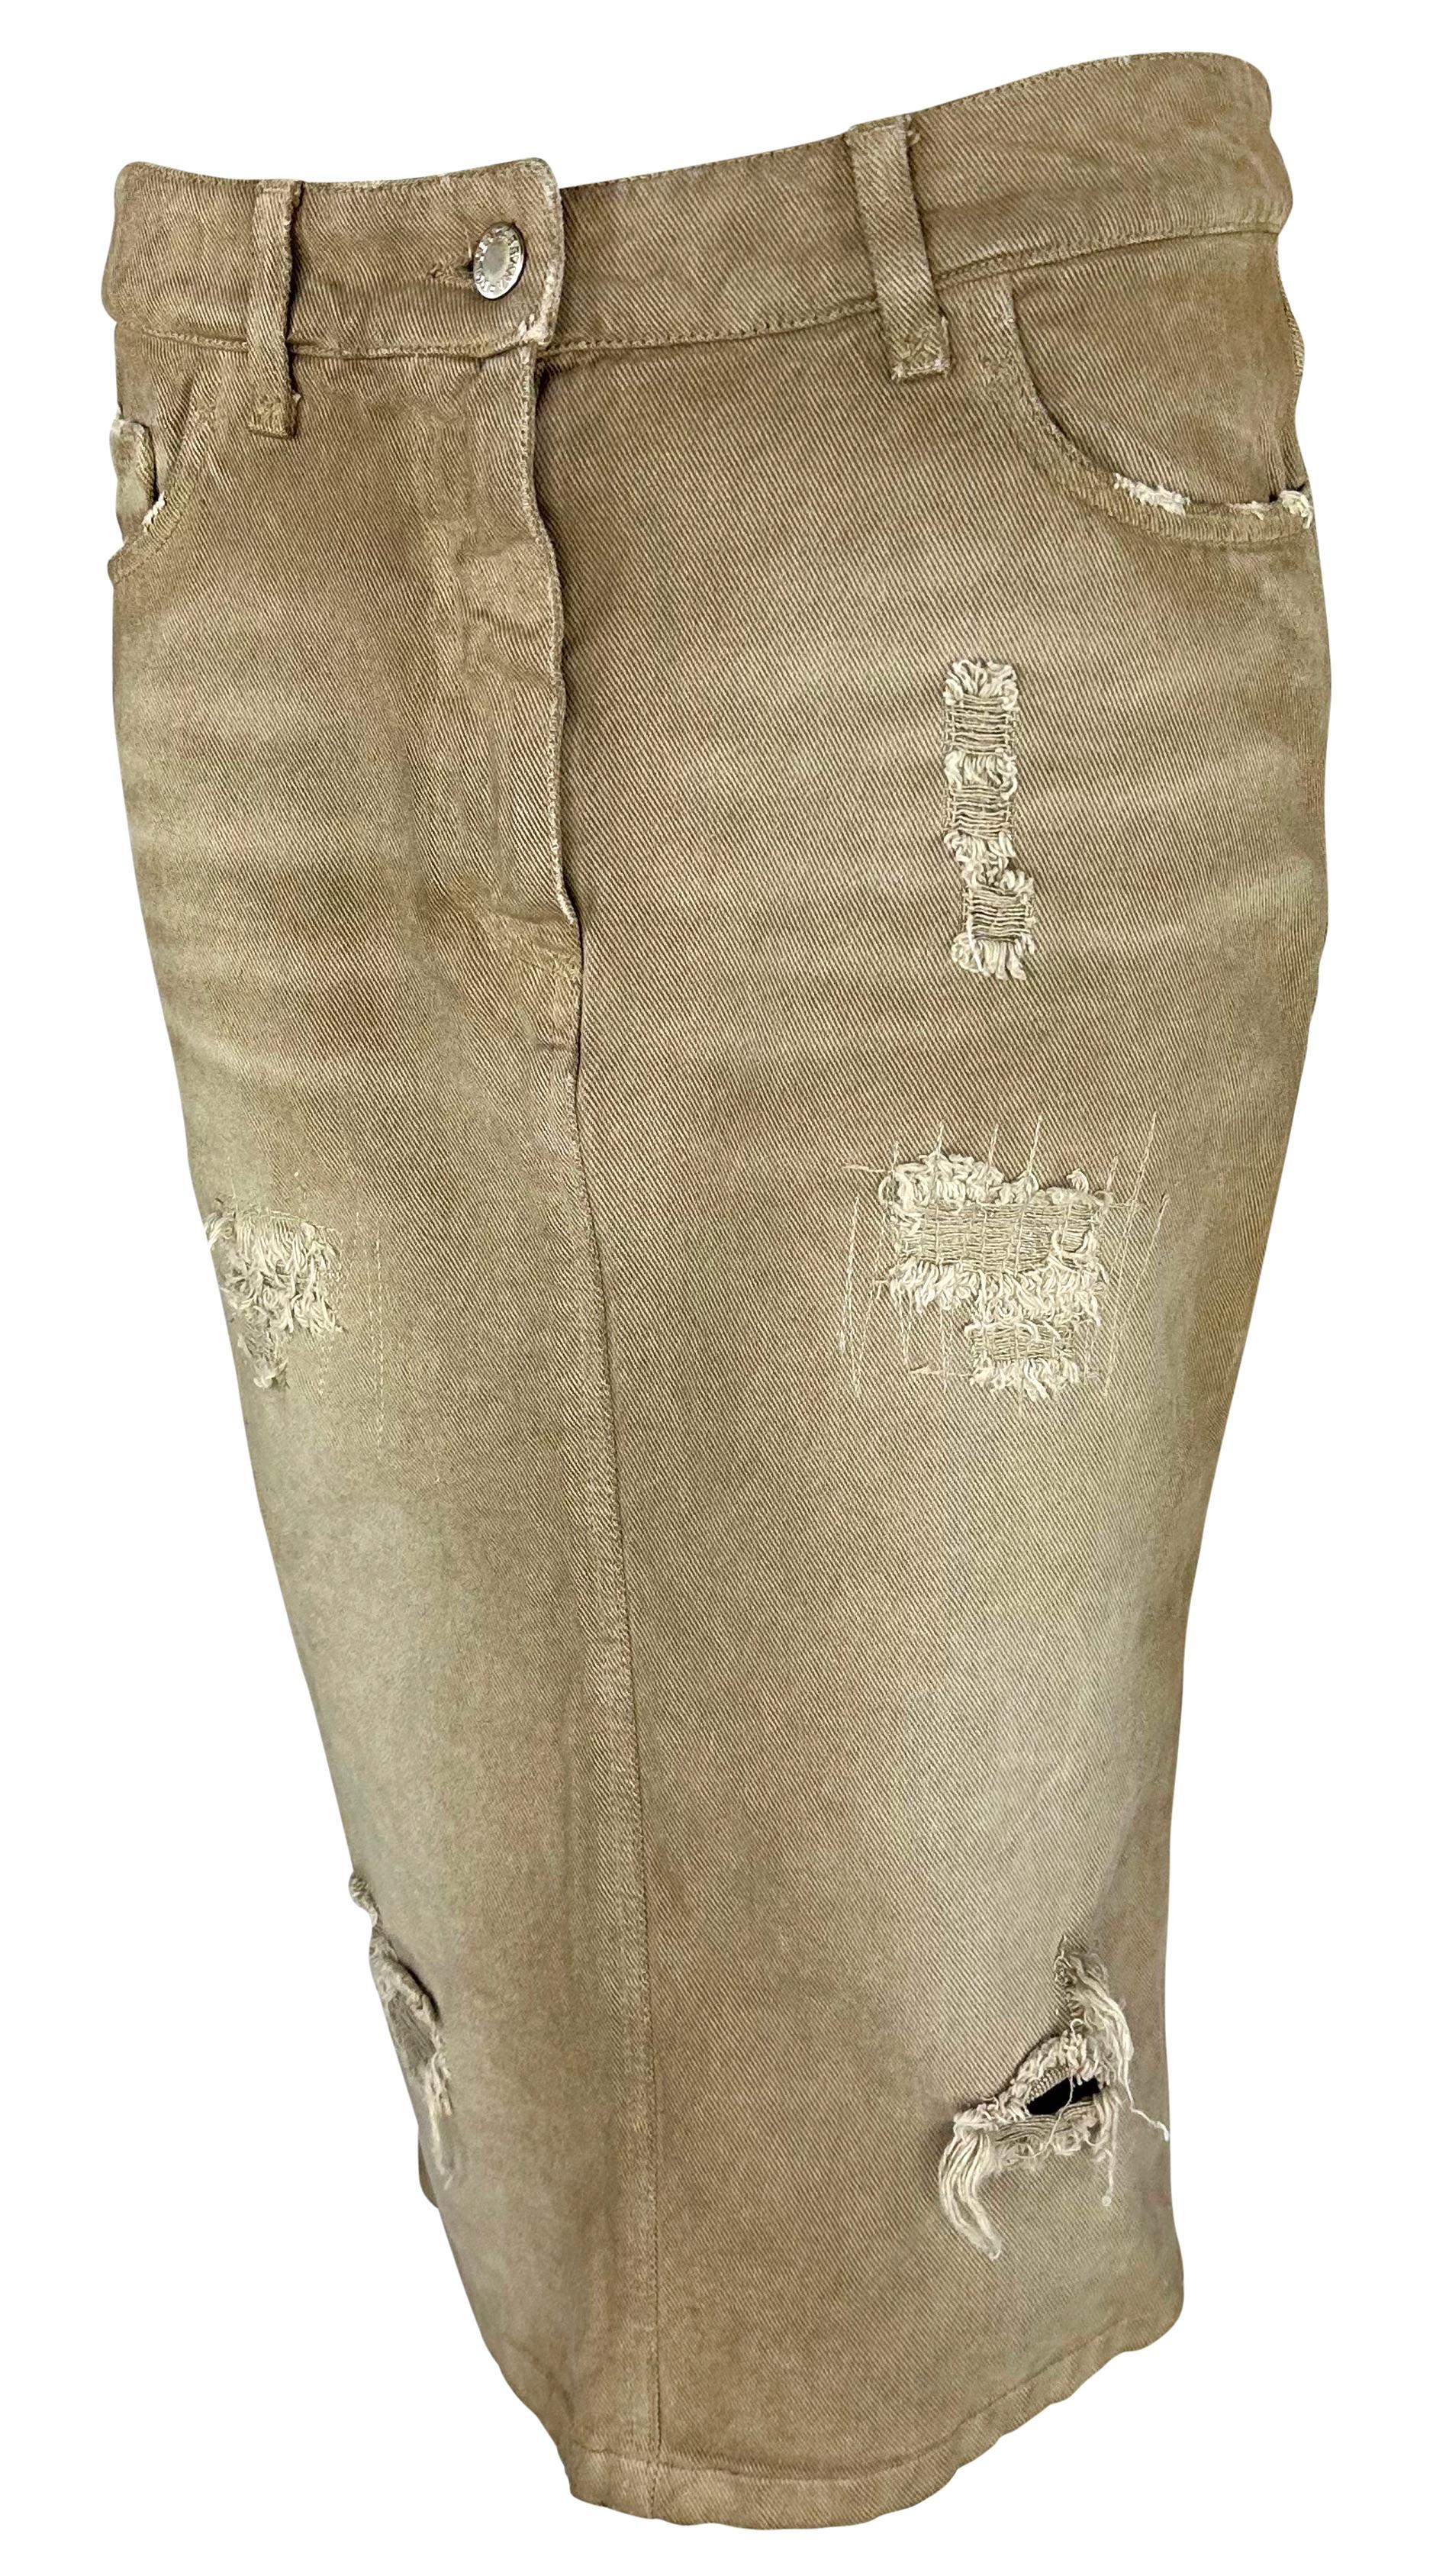 NWT Early 2000s Dolce & Gabbana Distressed Tan Denim Mid-Length Skirt In Excellent Condition For Sale In West Hollywood, CA